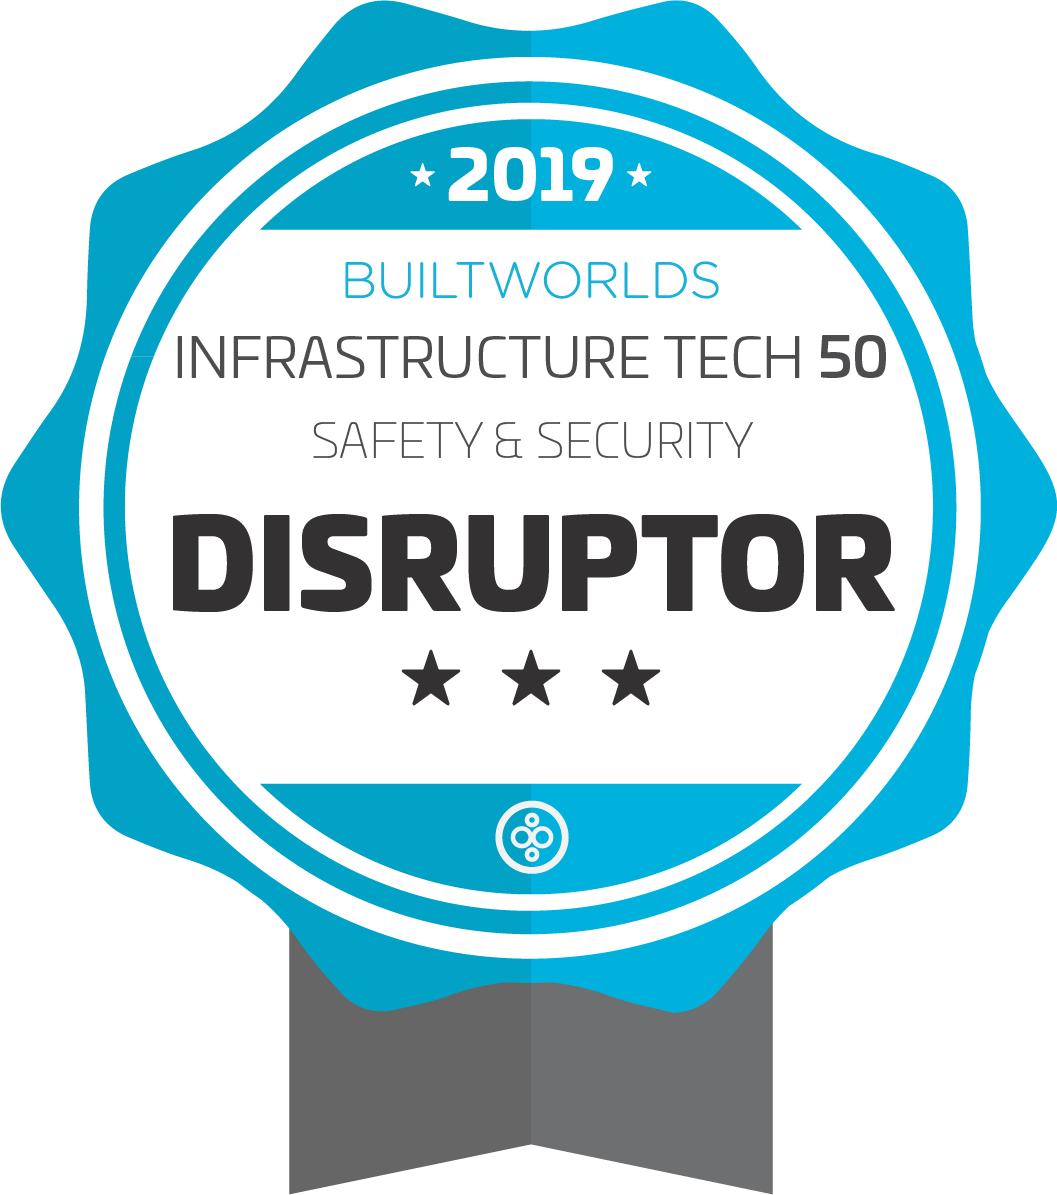 Safety & Security DISRUPTOR